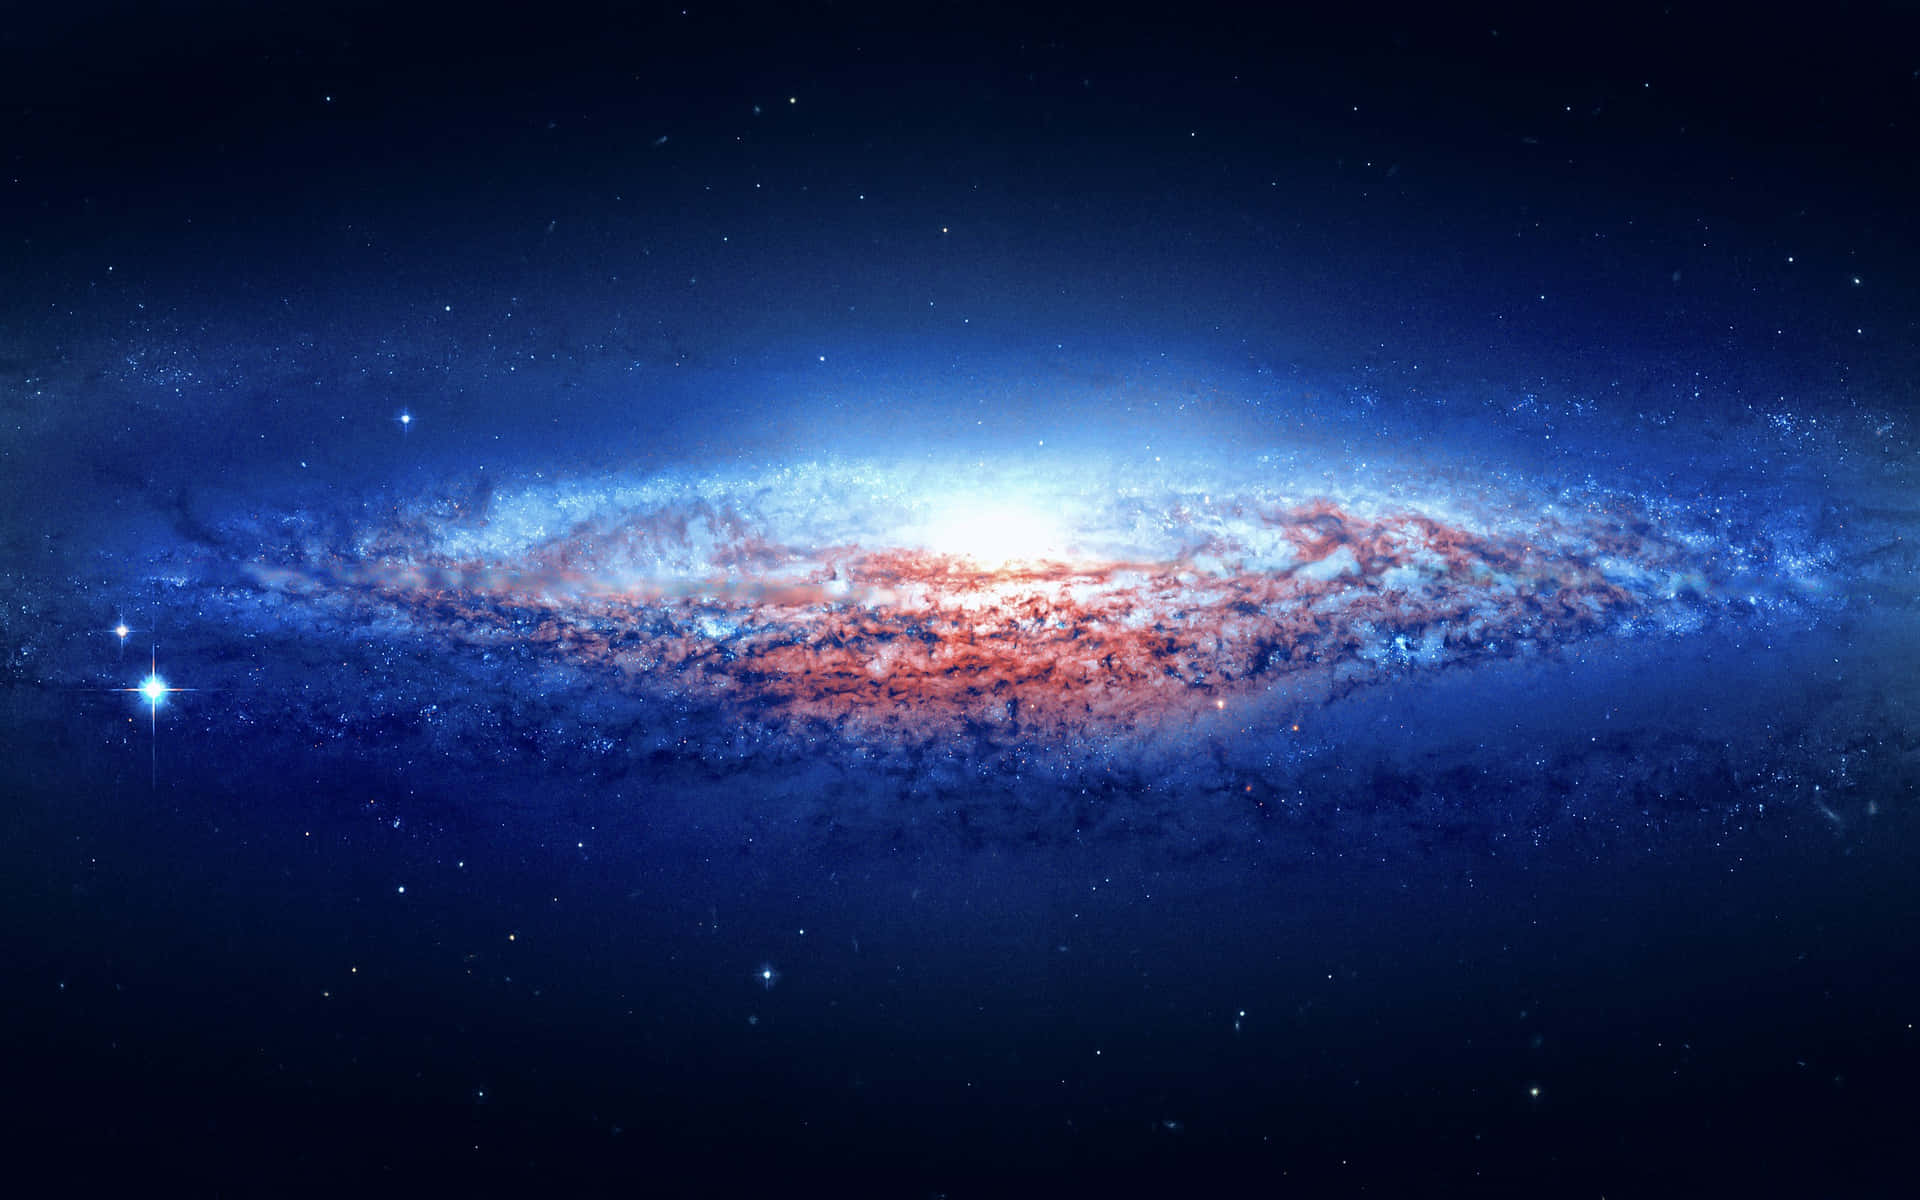 View of the Andromeda Galaxy in 4K Wallpaper